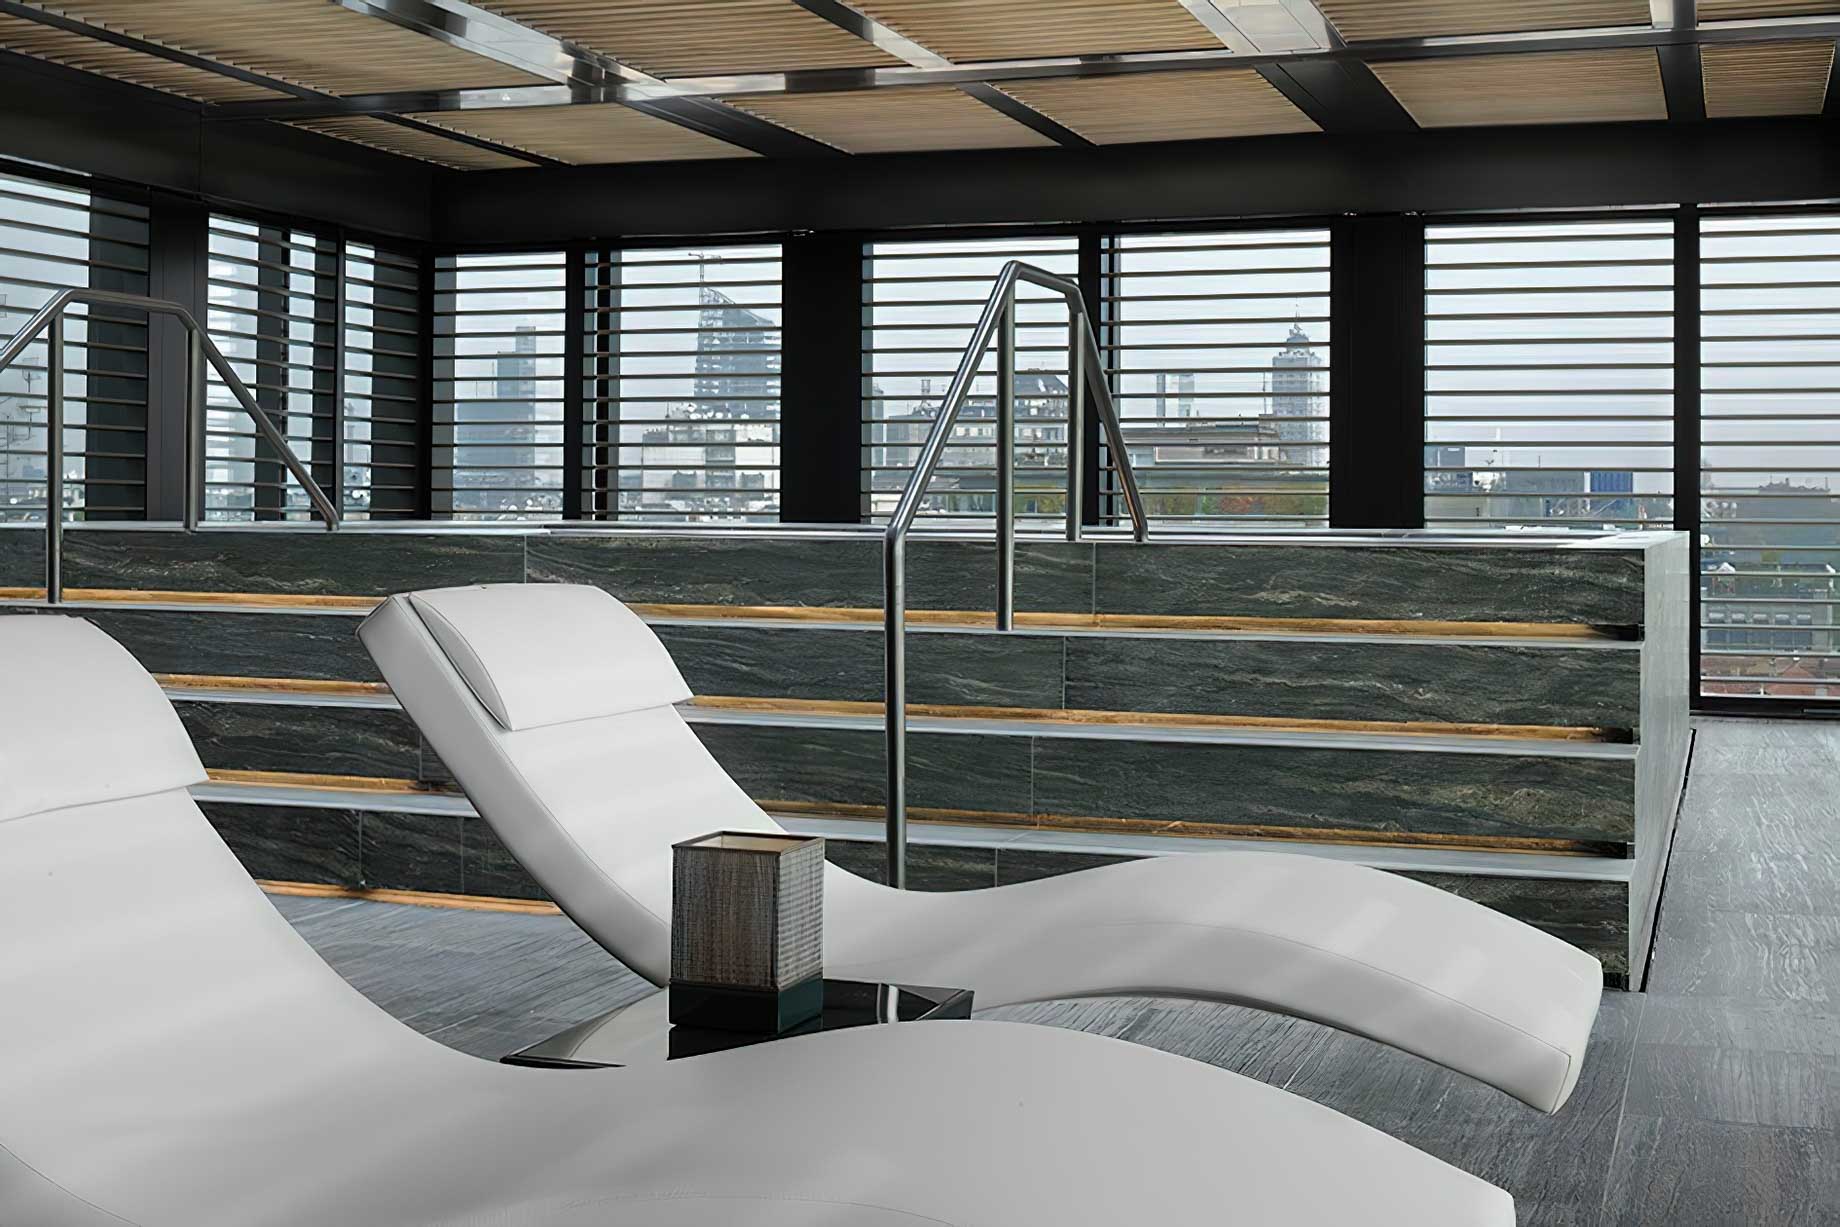 125 – Armani Hotel Milano – Milan, Italy – Armani SPA Lounge Chairs and Relaxation Pool